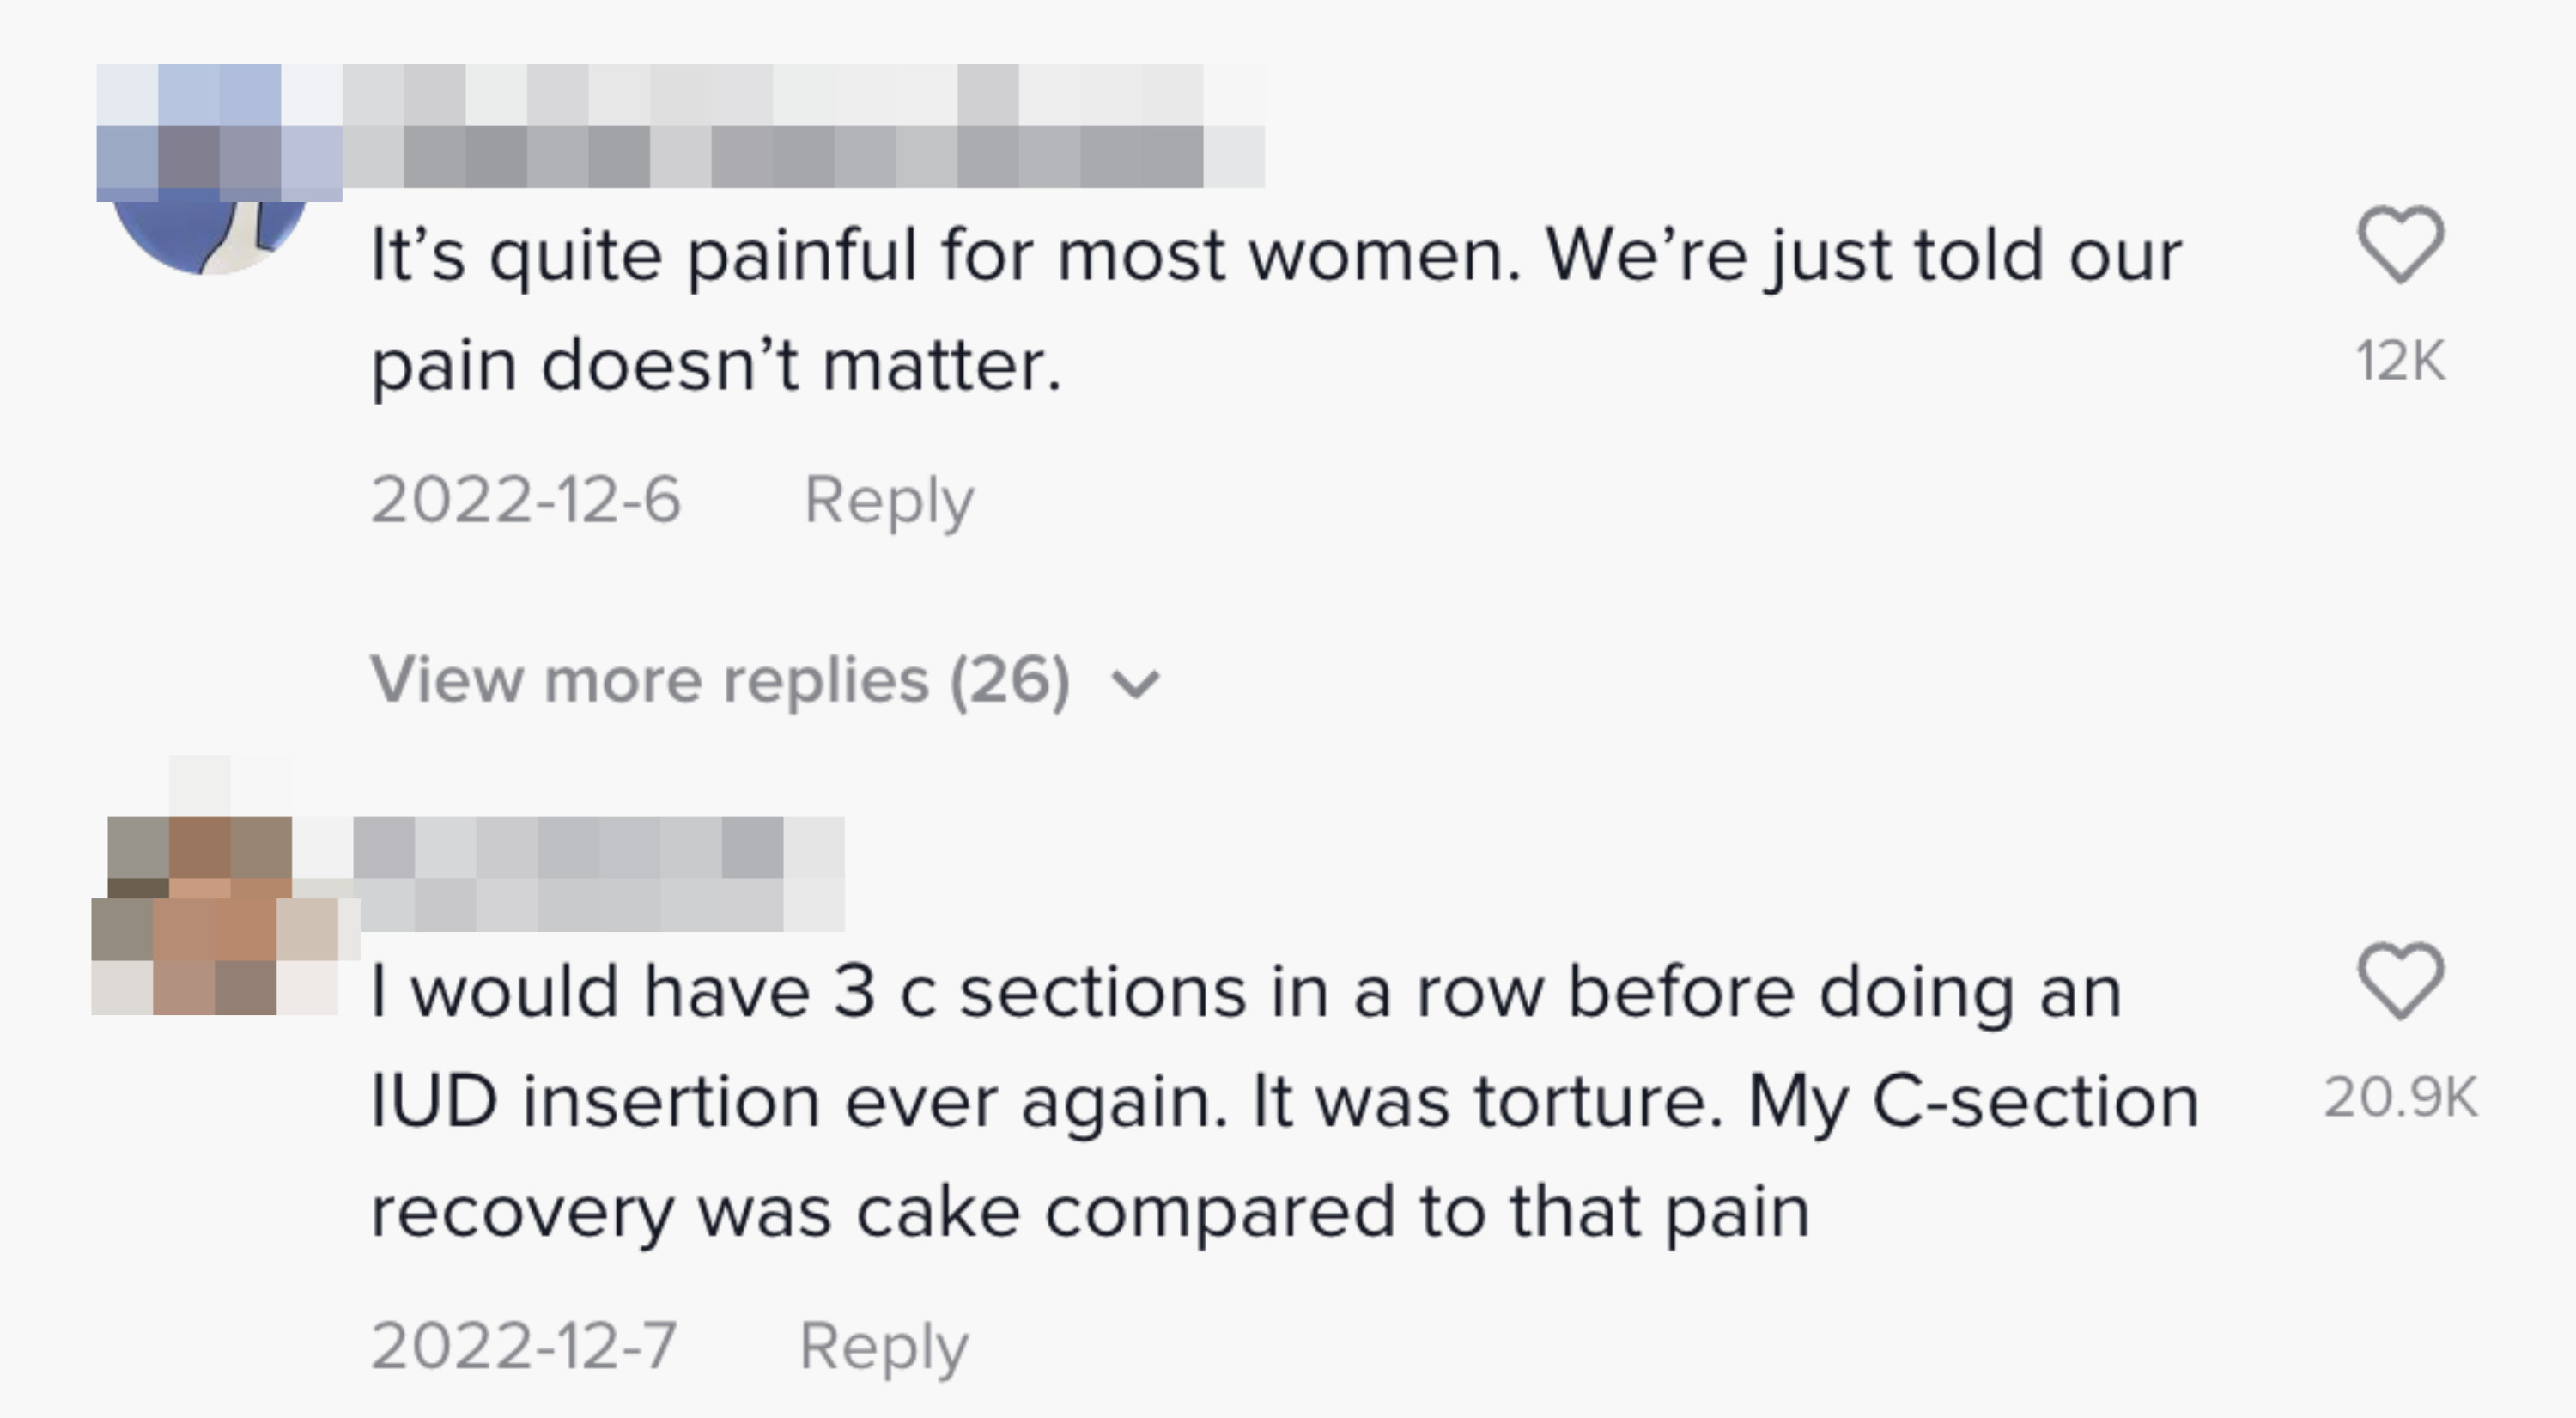 One person said &quot;It&#x27;s quite painful for most women. We&#x27;re just told our pain doesn&#x27;t matter&quot;